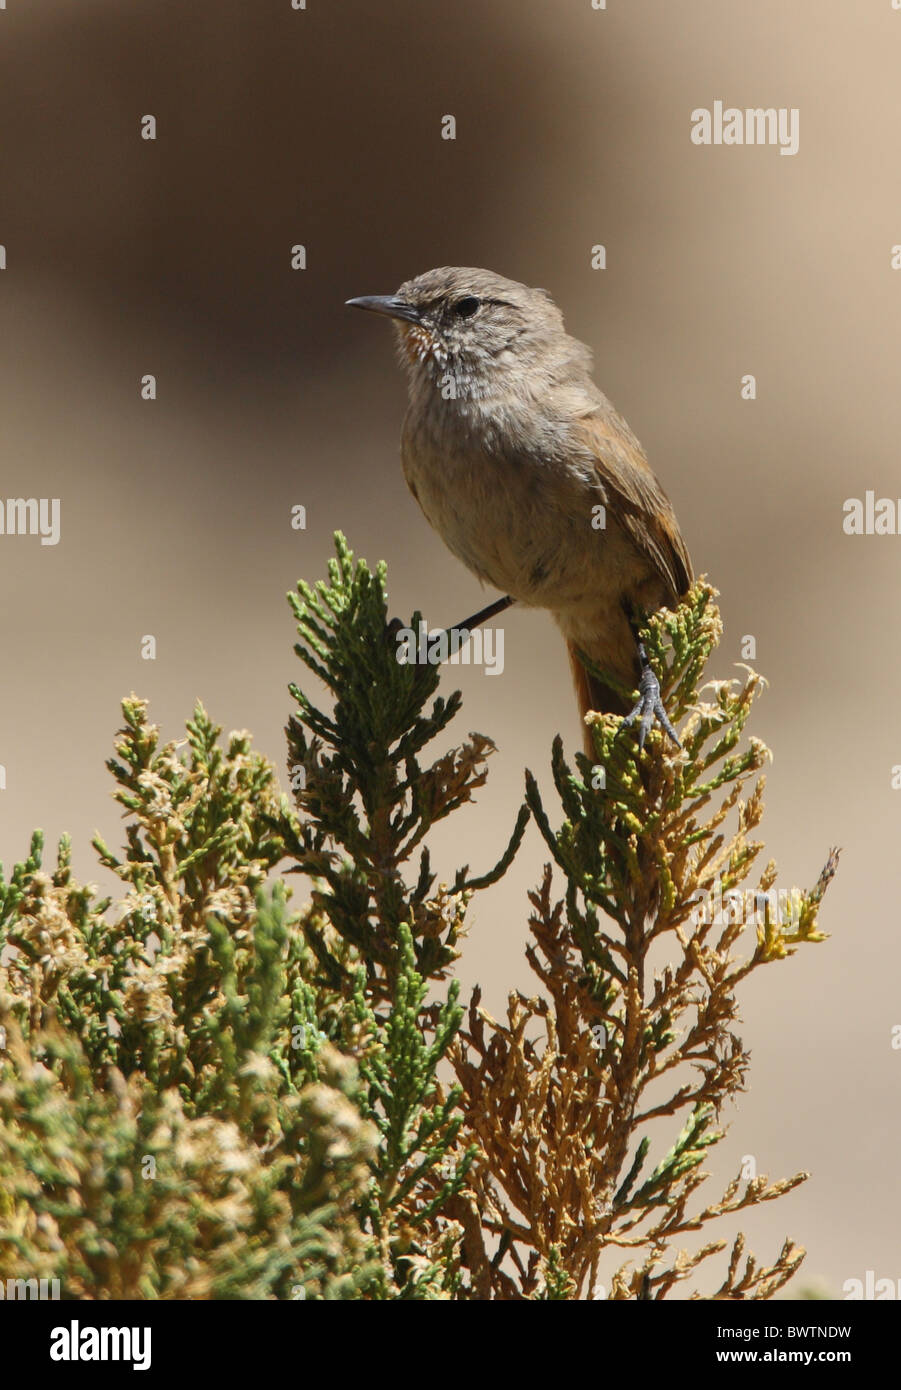 Puna Canastero (Asthenes sclateri) adult, perched on bush, Jujuy, Argentina, january Stock Photo